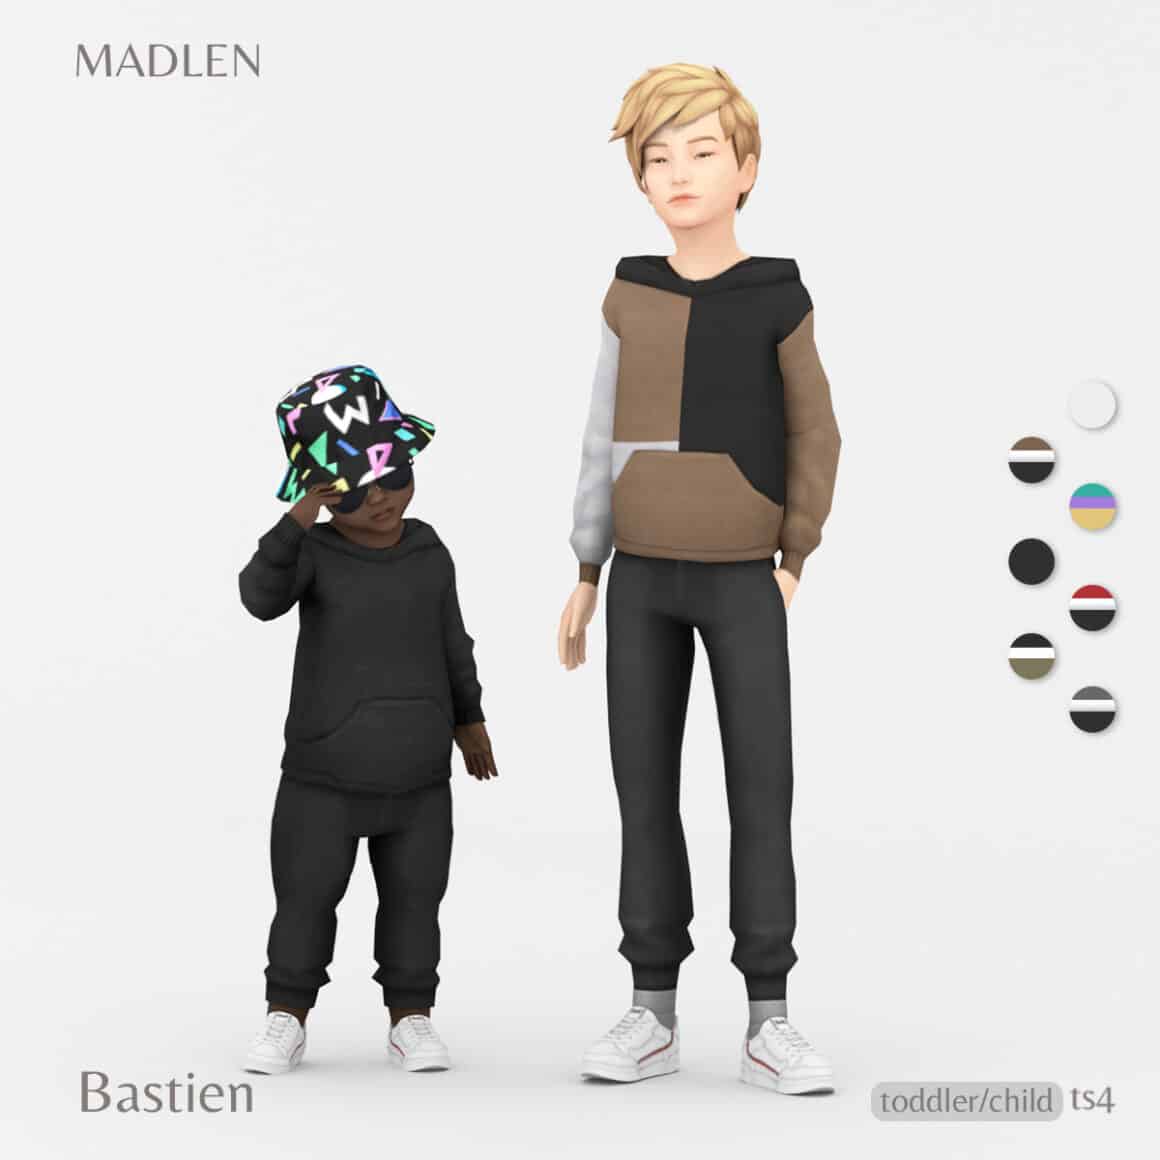 Sims 4 Kids Bastien Outfit